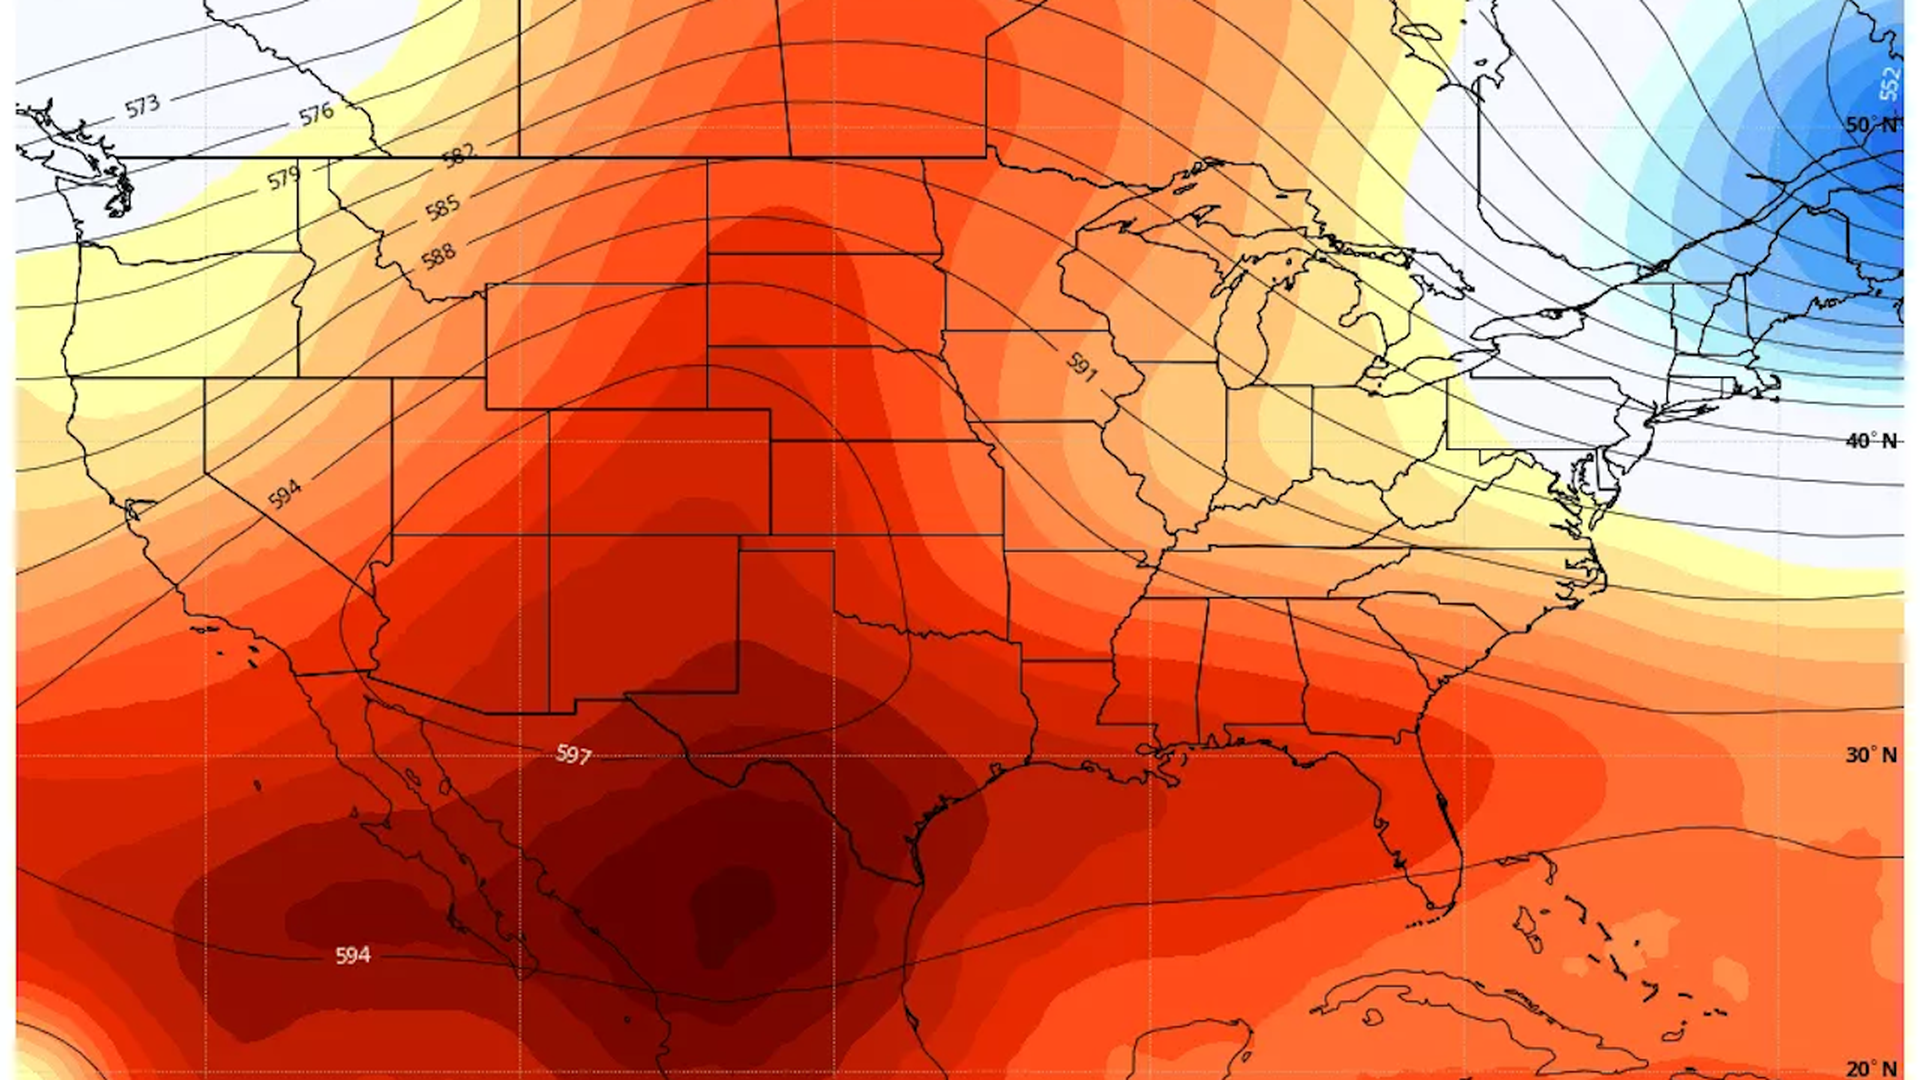 Map showing a large ridge of high pressure, also known as a heat dome, across the West and Plains on July 9. Image courtesy of Weatherbell.com